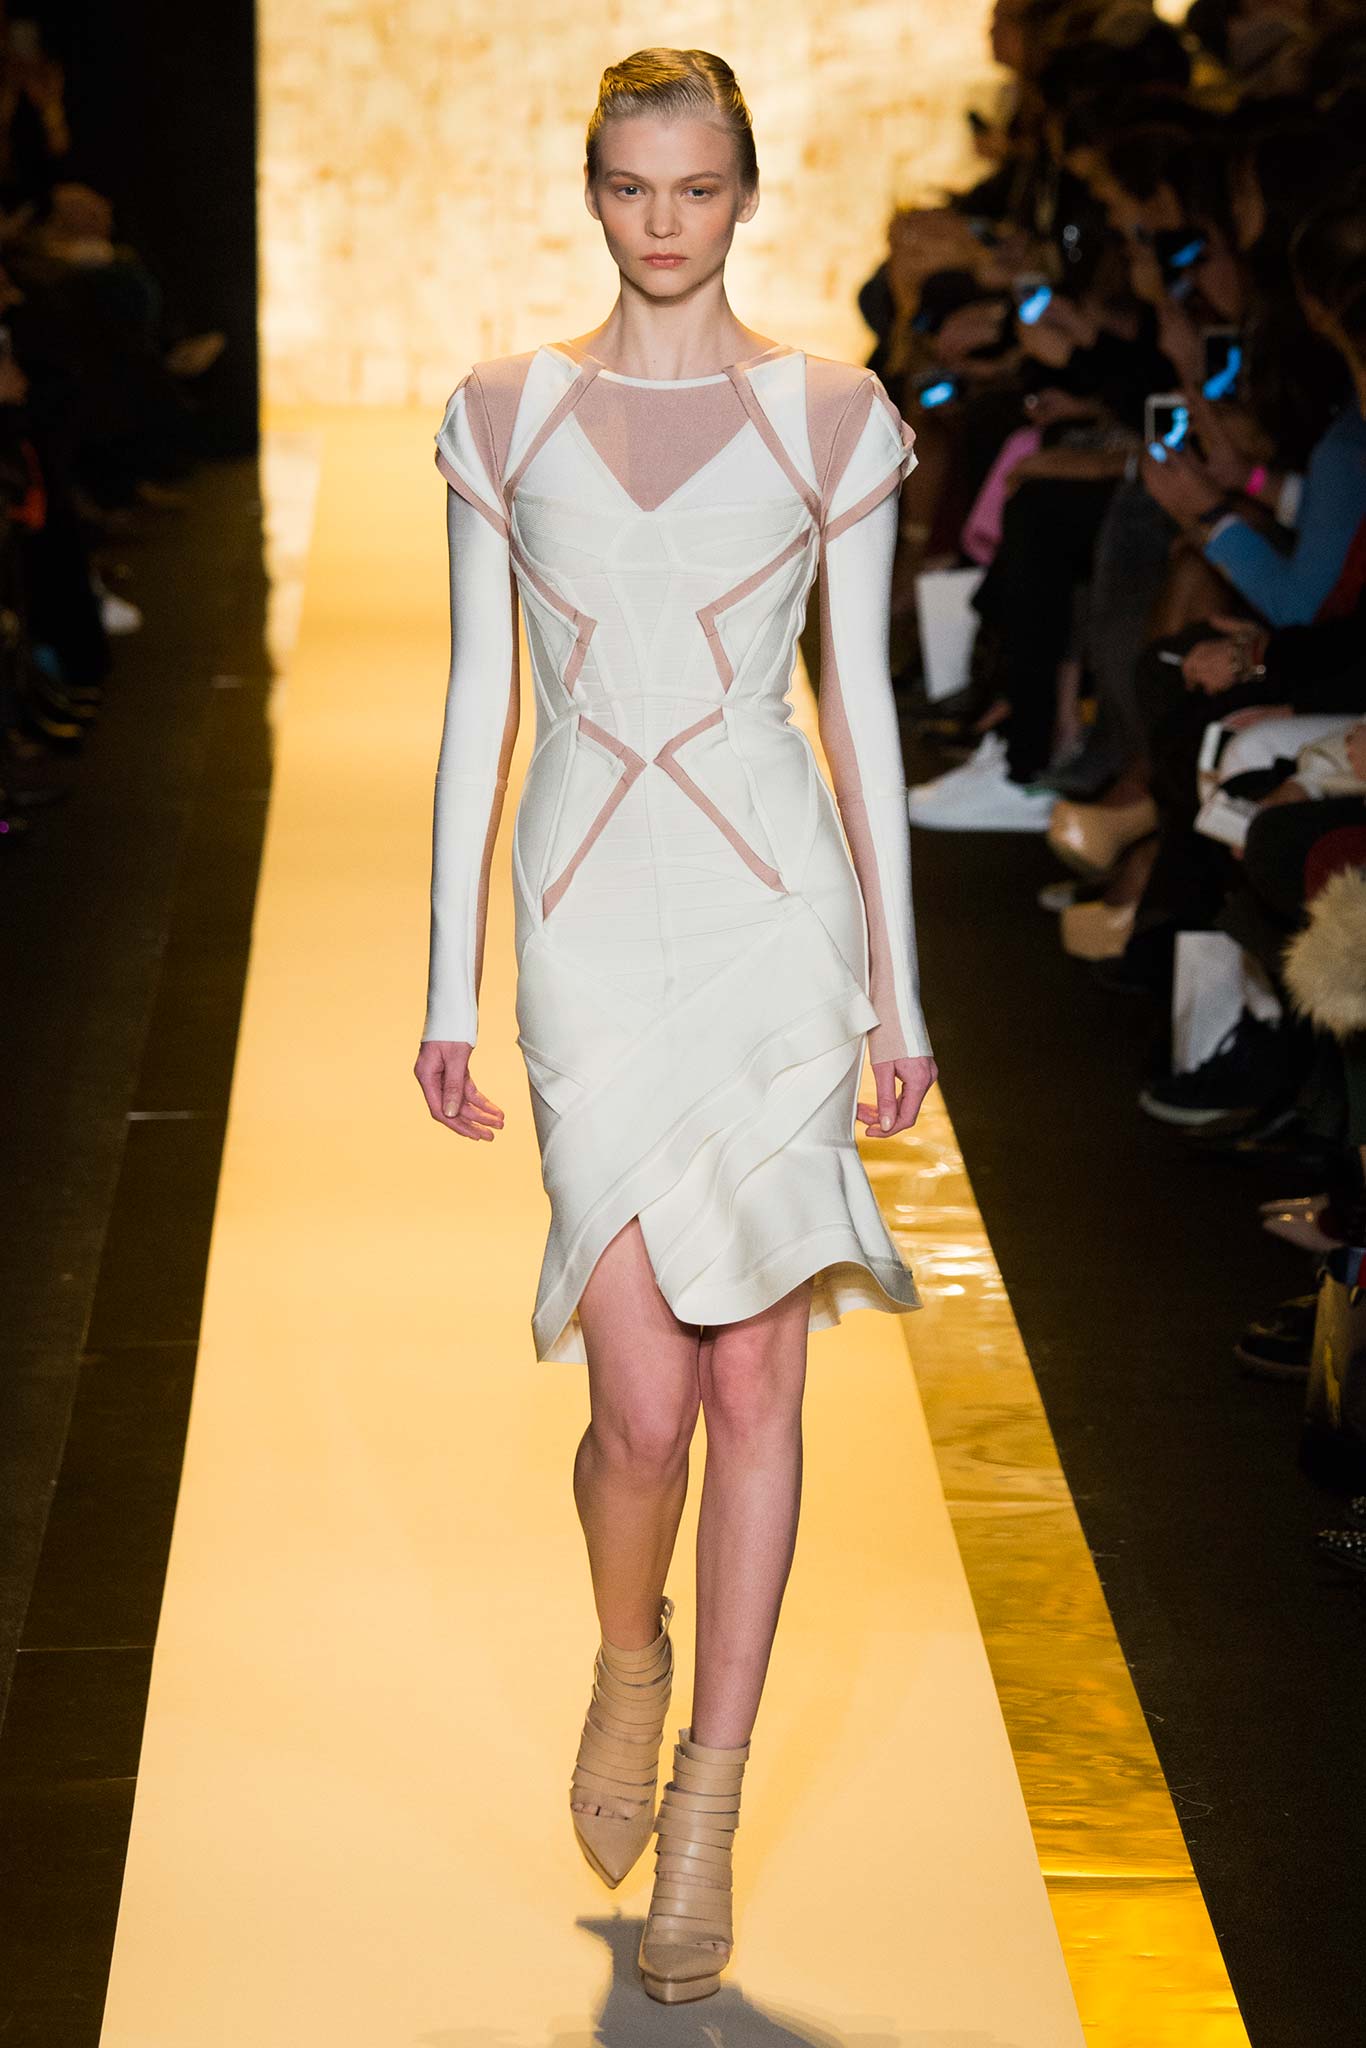 HERVE LEGER BY MAX AZRIA AUTUMN/WINTER 2015-16 READY-TO-WEAR NEW YORK